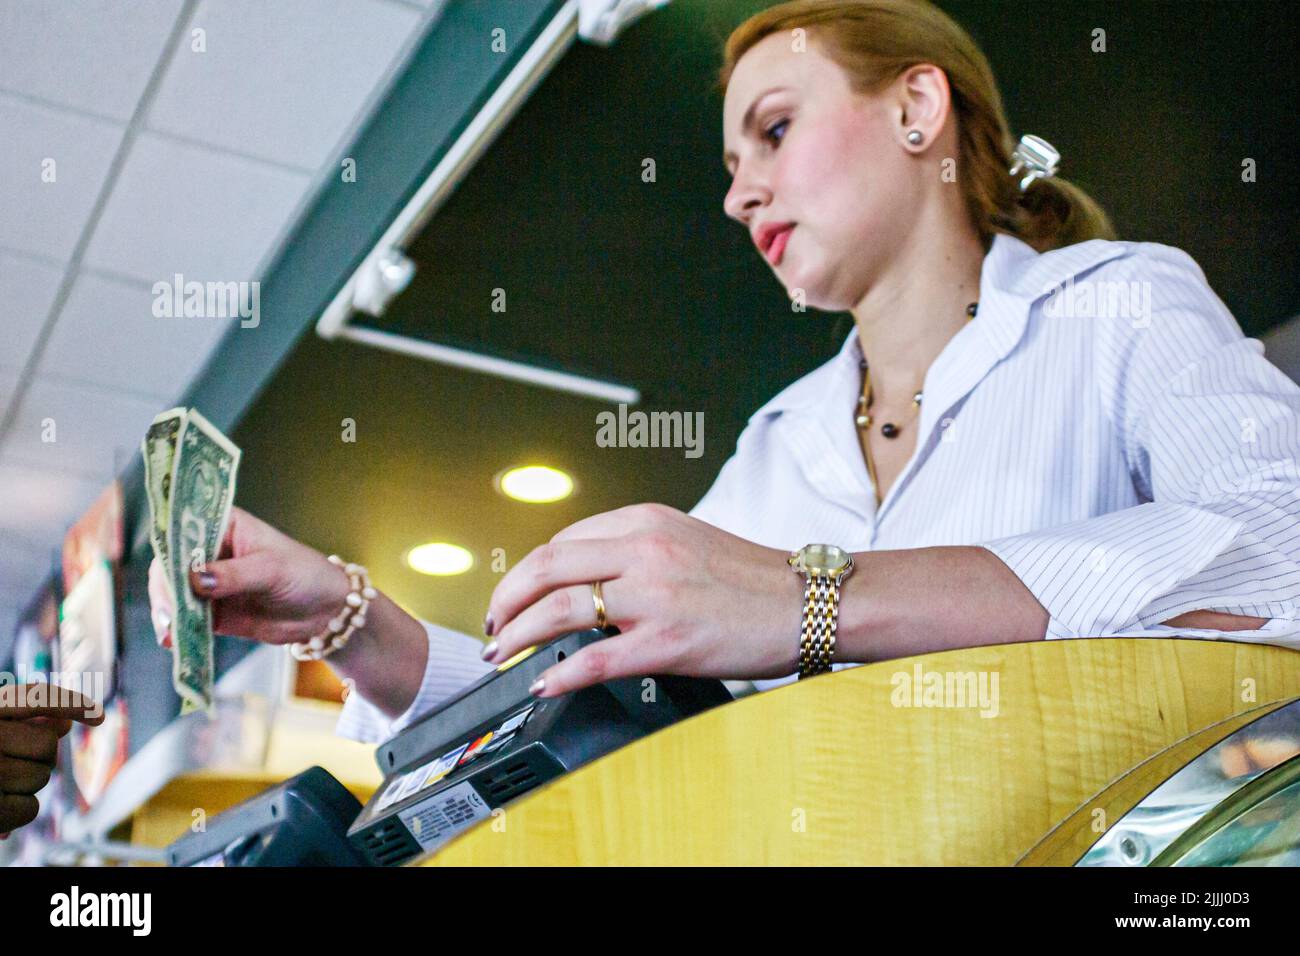 Miami Florida,Coral Gables,restaurant cashier hostess server adult adults woman women female lady,employee employees worker workers working money Stock Photo